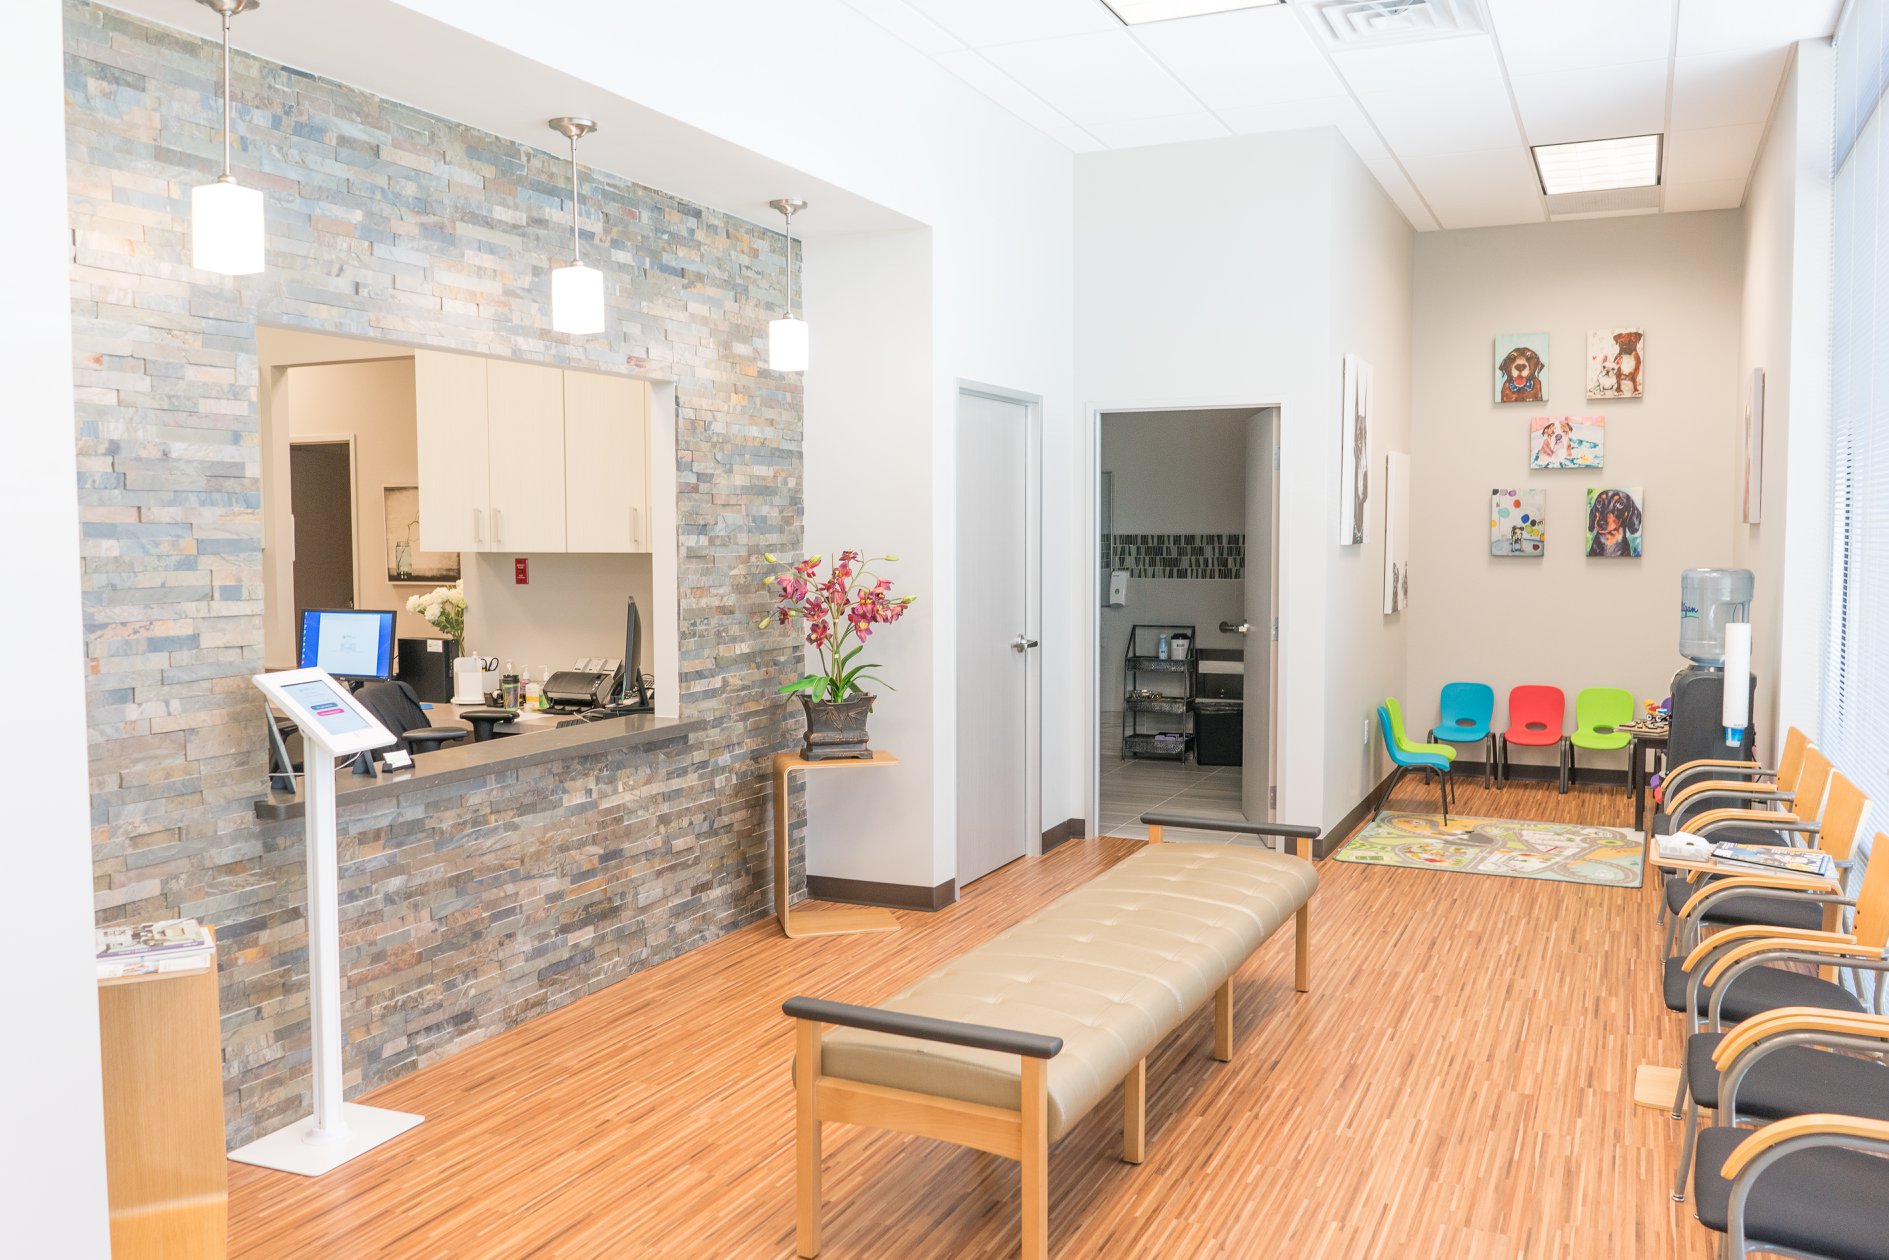 Photo of lobby and play area at University Urgent Care. Stone wall at reception area, bench in middle, chairs against the wall, and small chairs and toys in the back